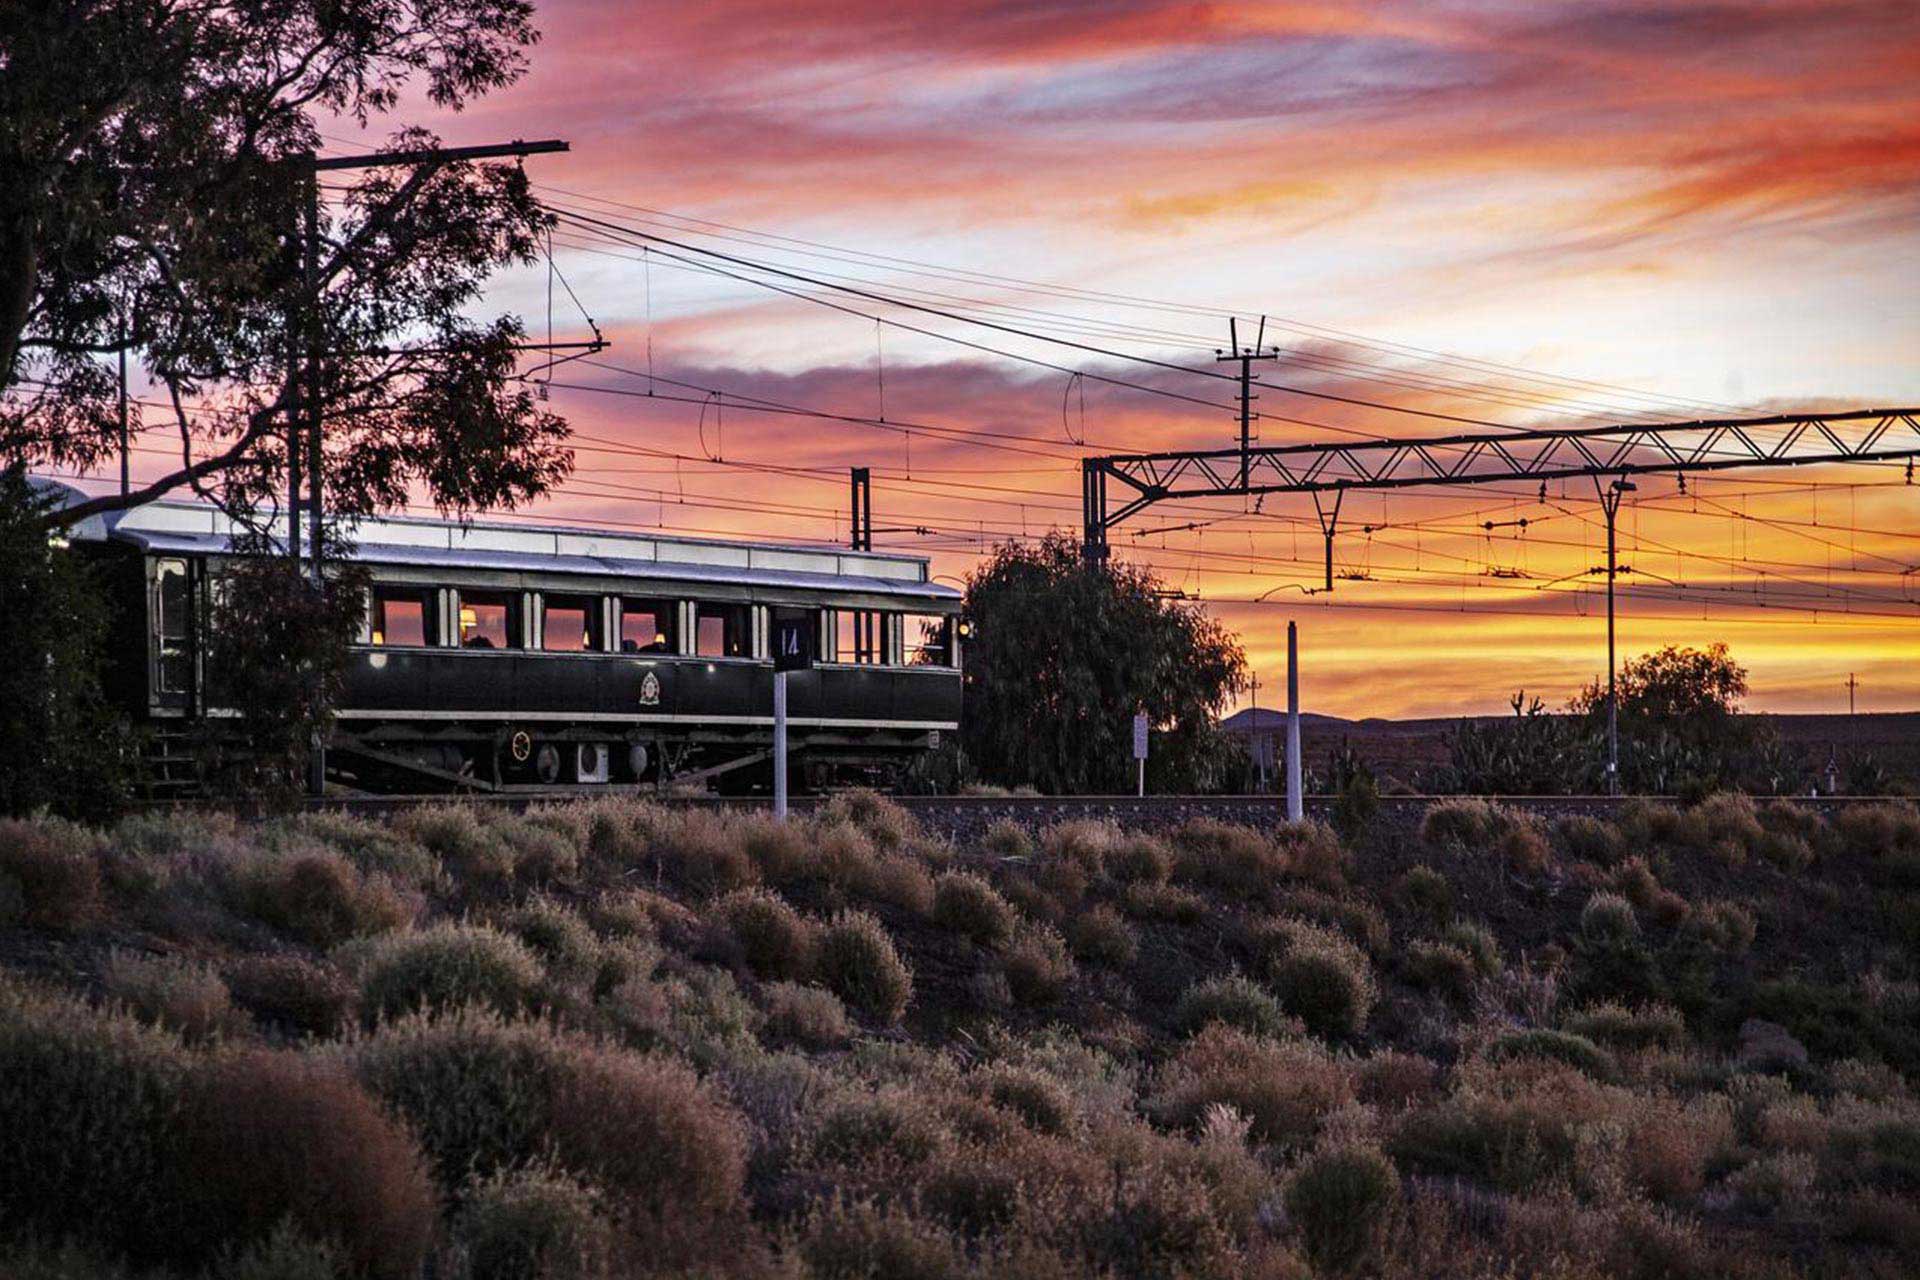 A train passes through nature at sunset